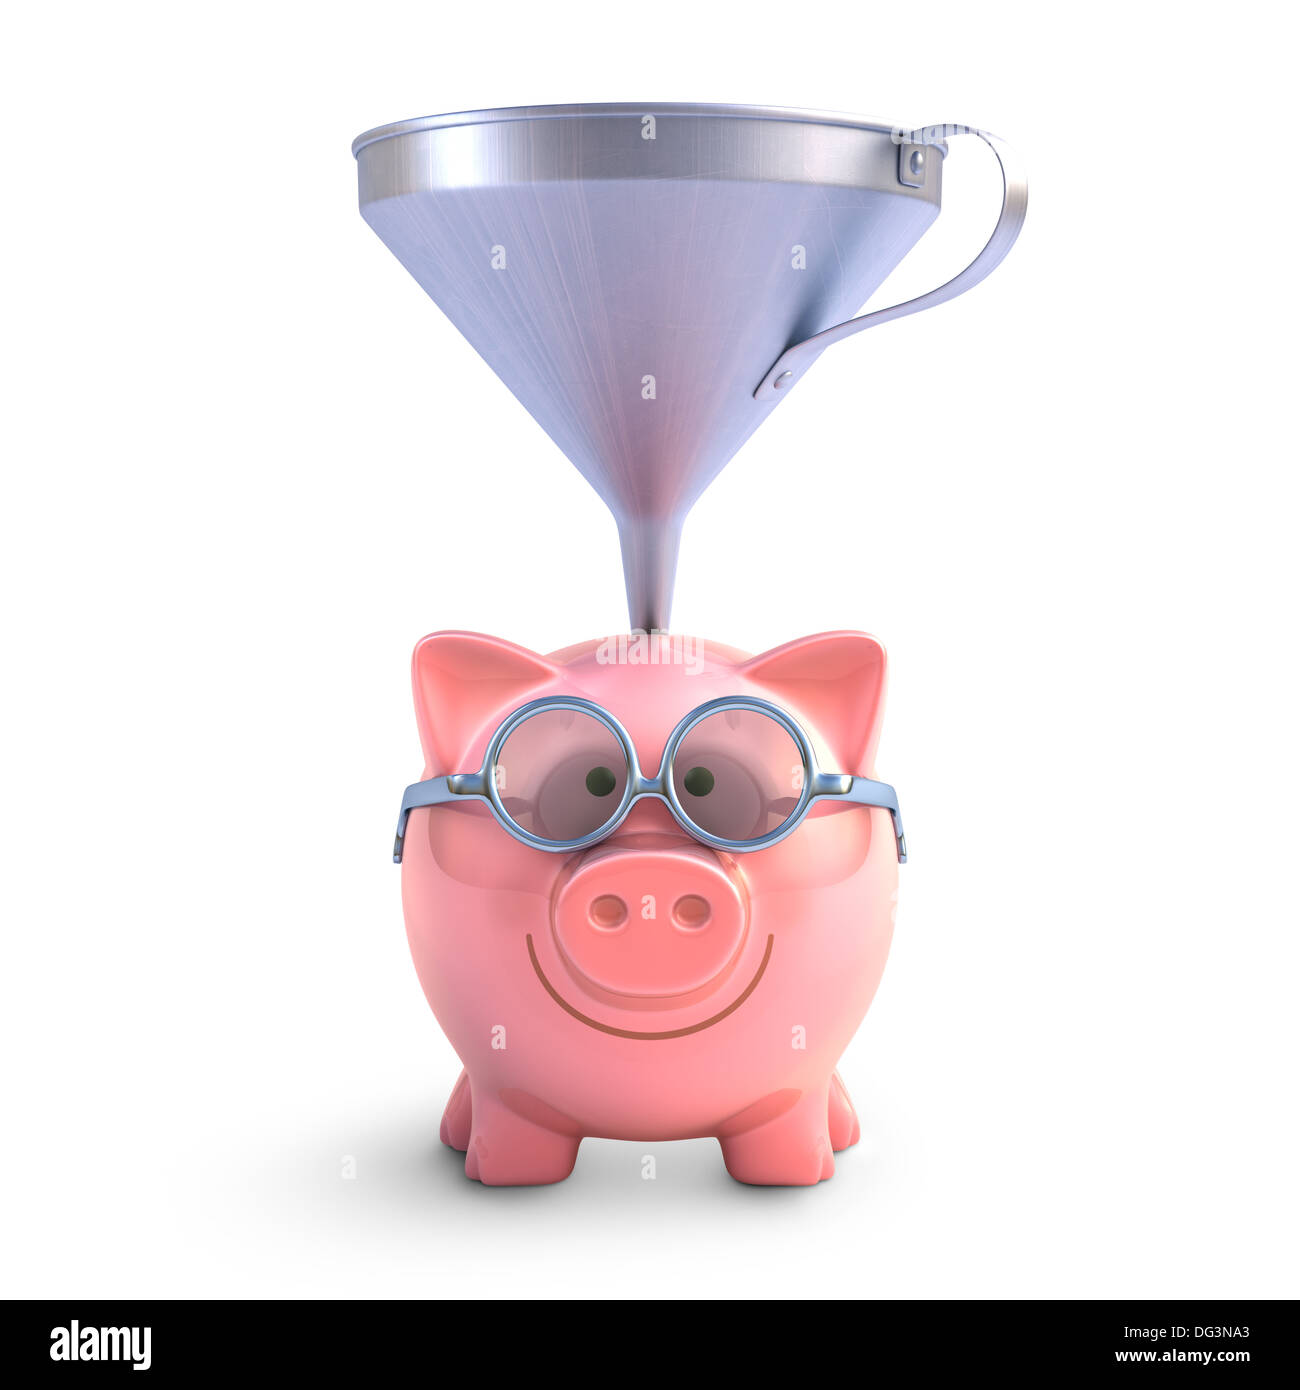 Piggy bank with funnel to get all the coins. With clipping path included. Stock Photo